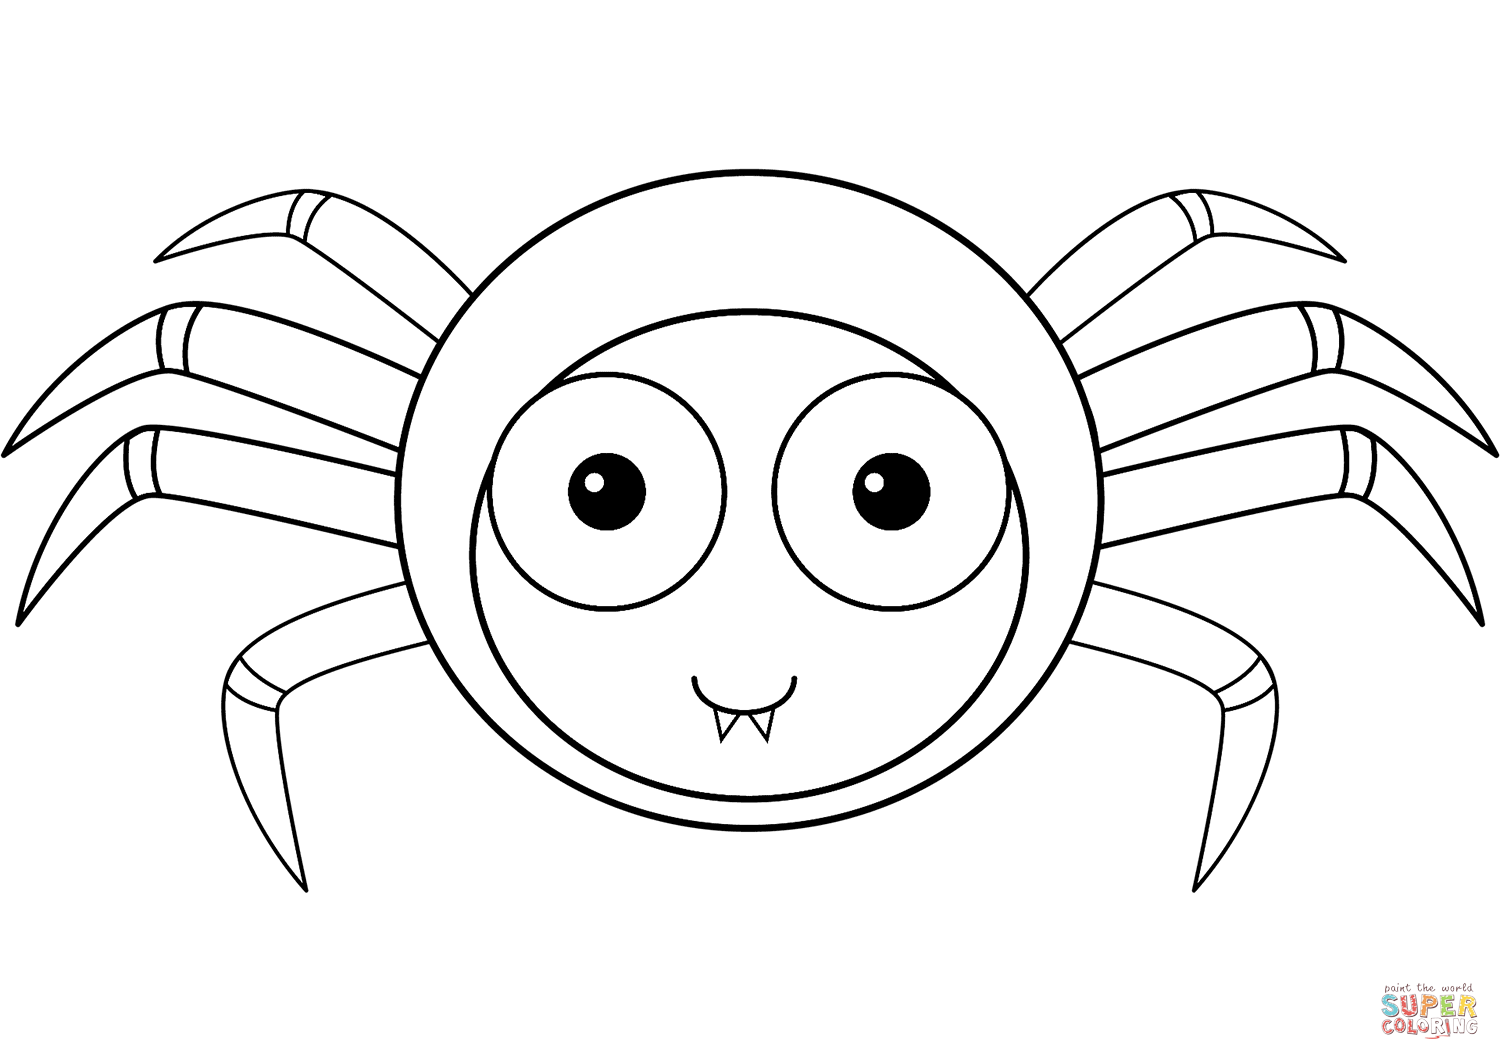 Cute cartoon spider coloring page free printable coloring pages